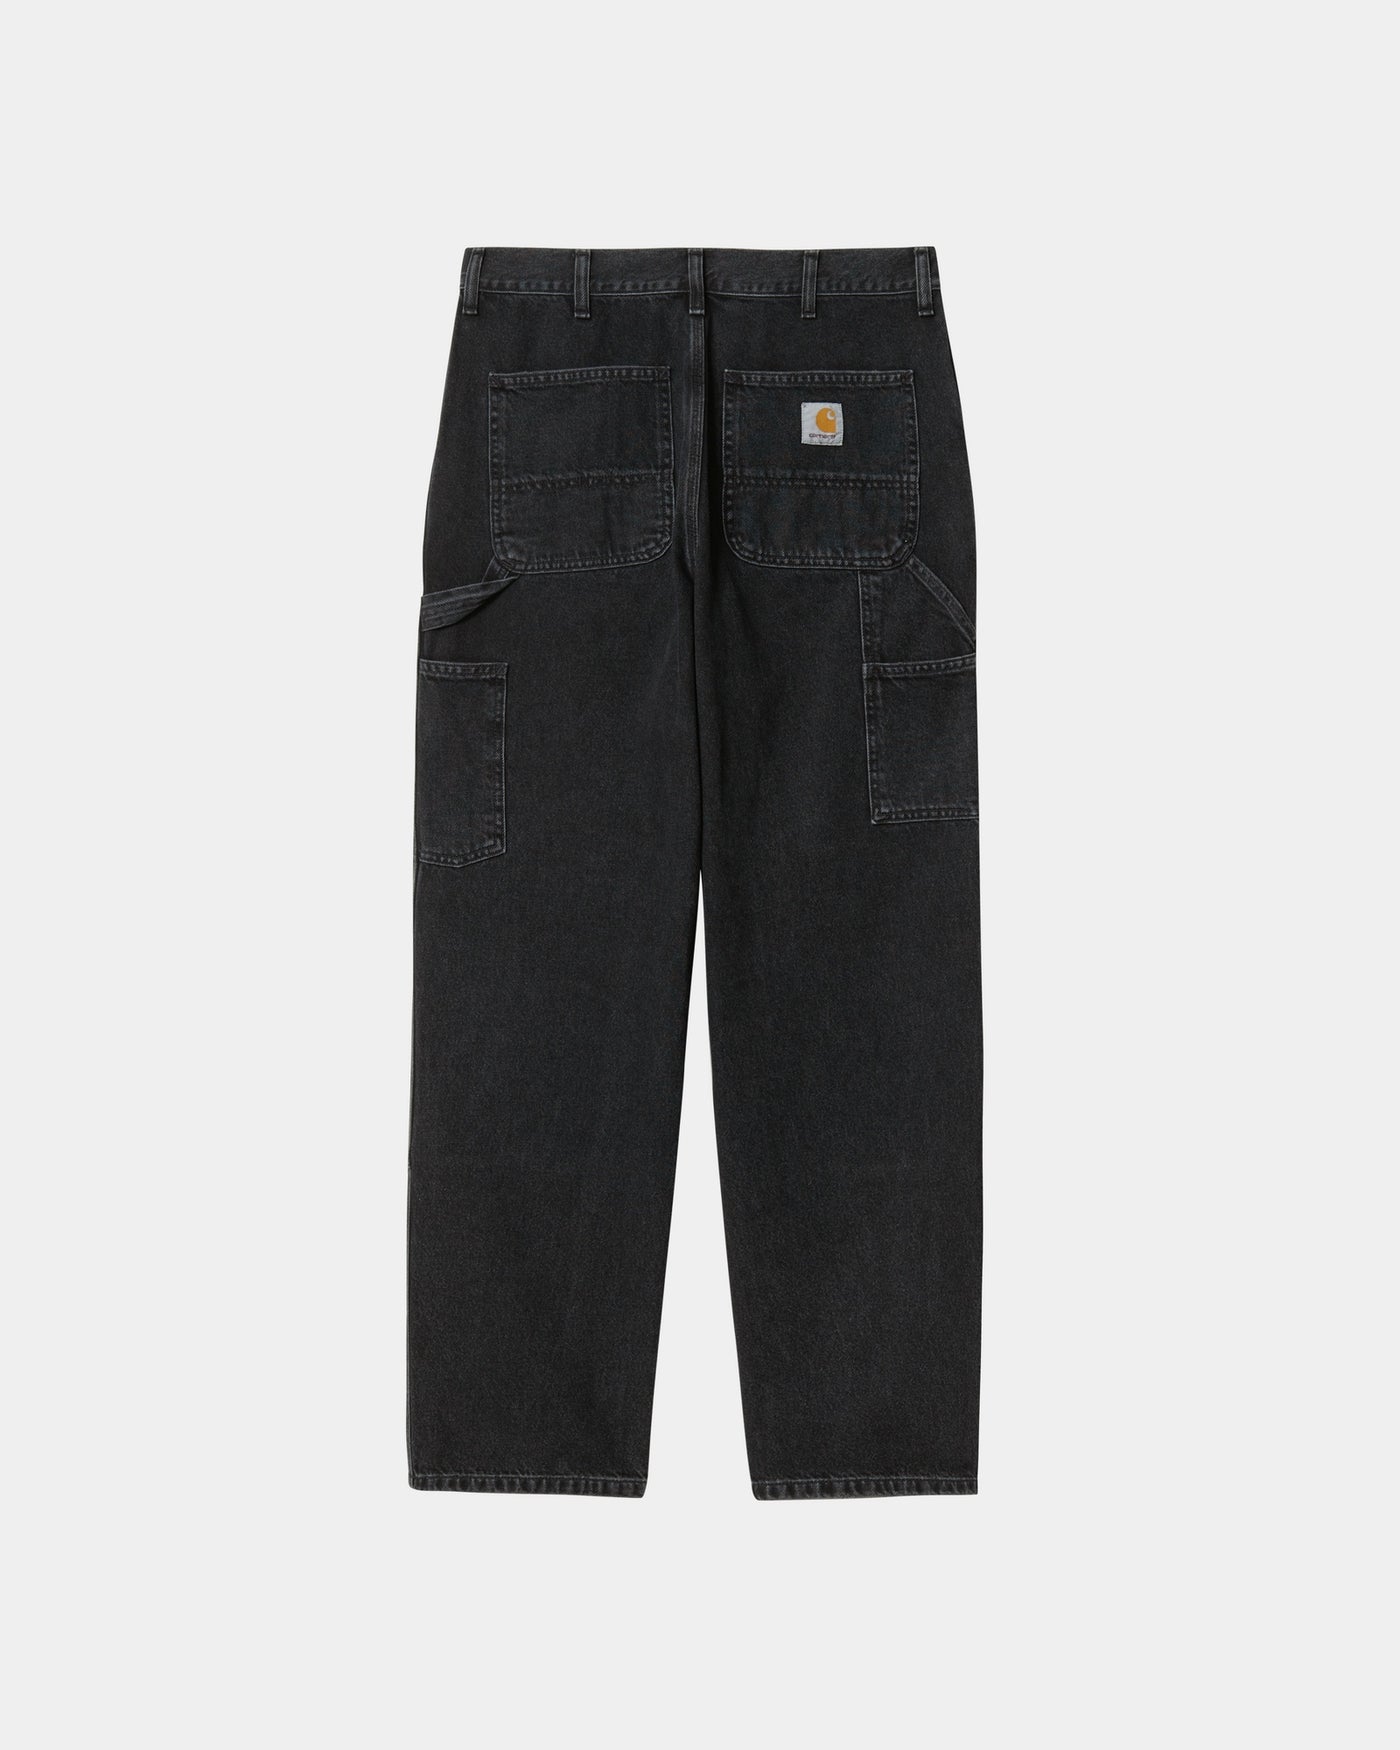 Carhartt WIP Double Knee Washed Black Jeans Organic